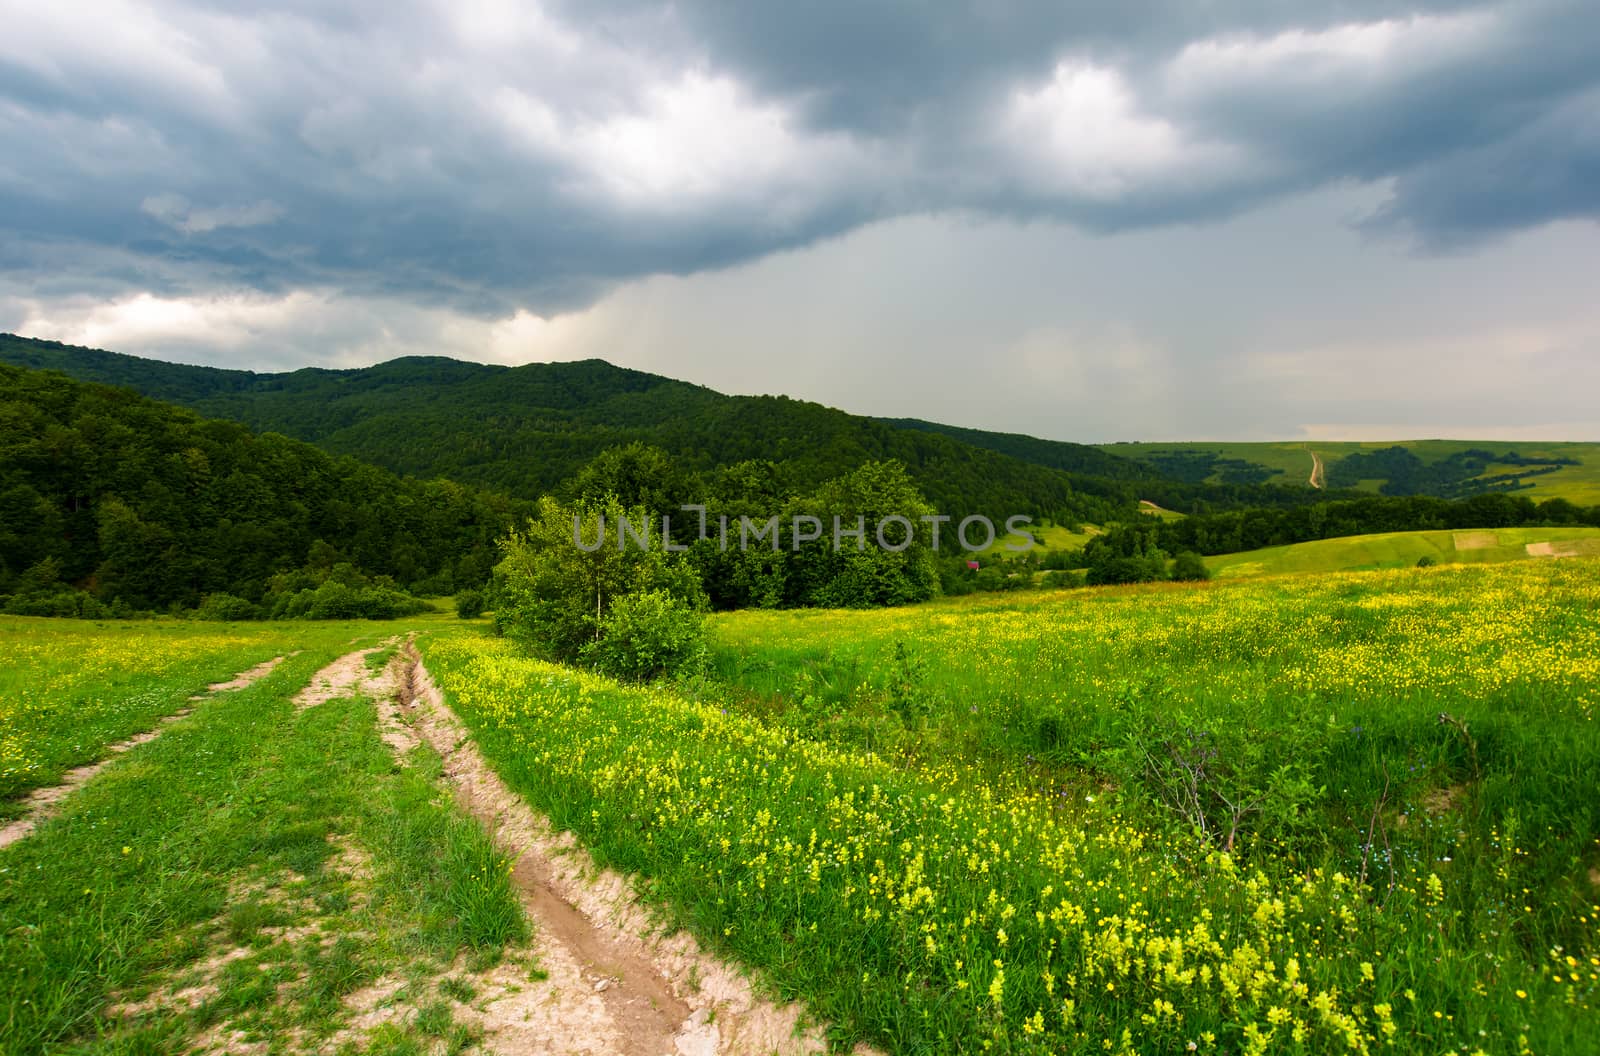 country road down the hill through the field. lovely countryside scenery in mountainous area before the summer storm